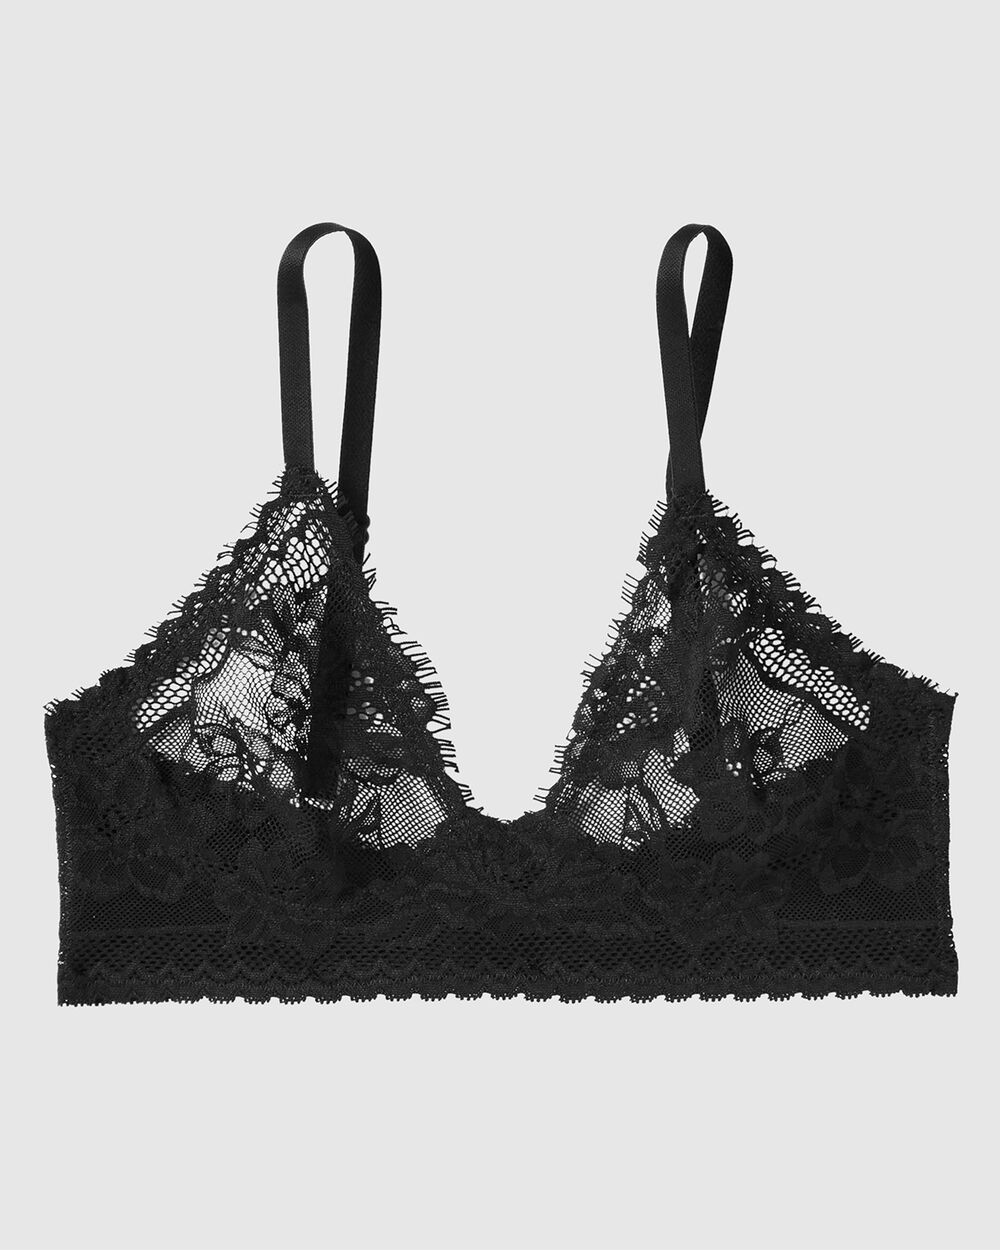 Best Deal for Lace Bralettes for Women 1 pc Lace Bra Camisole Bra for